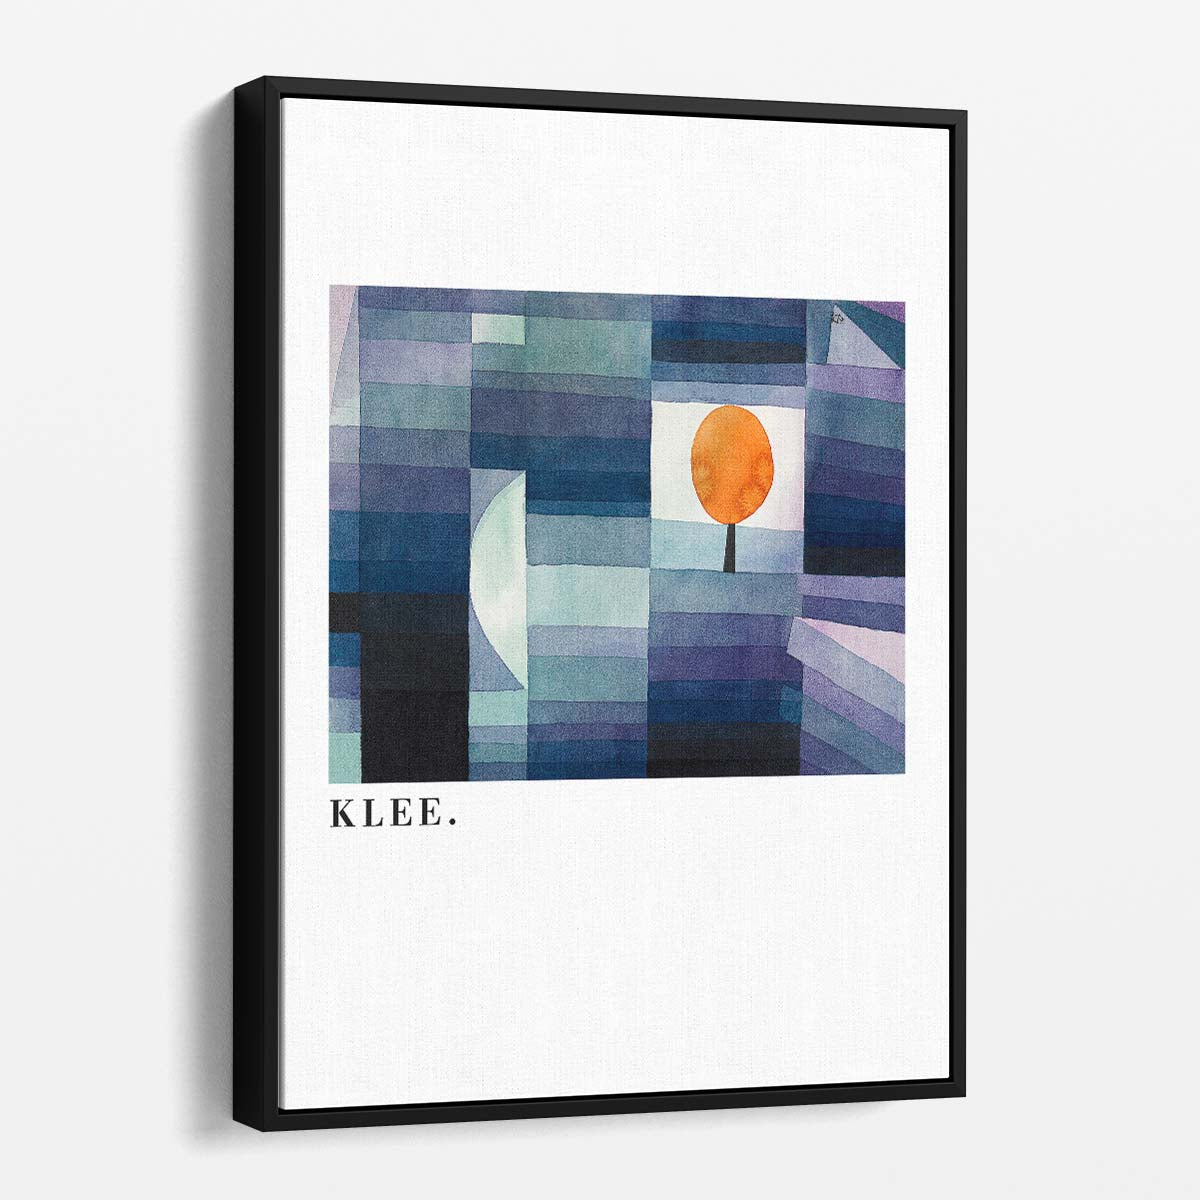 Paul Klee's 1922 Watercolor Illustration Harbinger of Autumn Art by Luxuriance Designs, made in USA